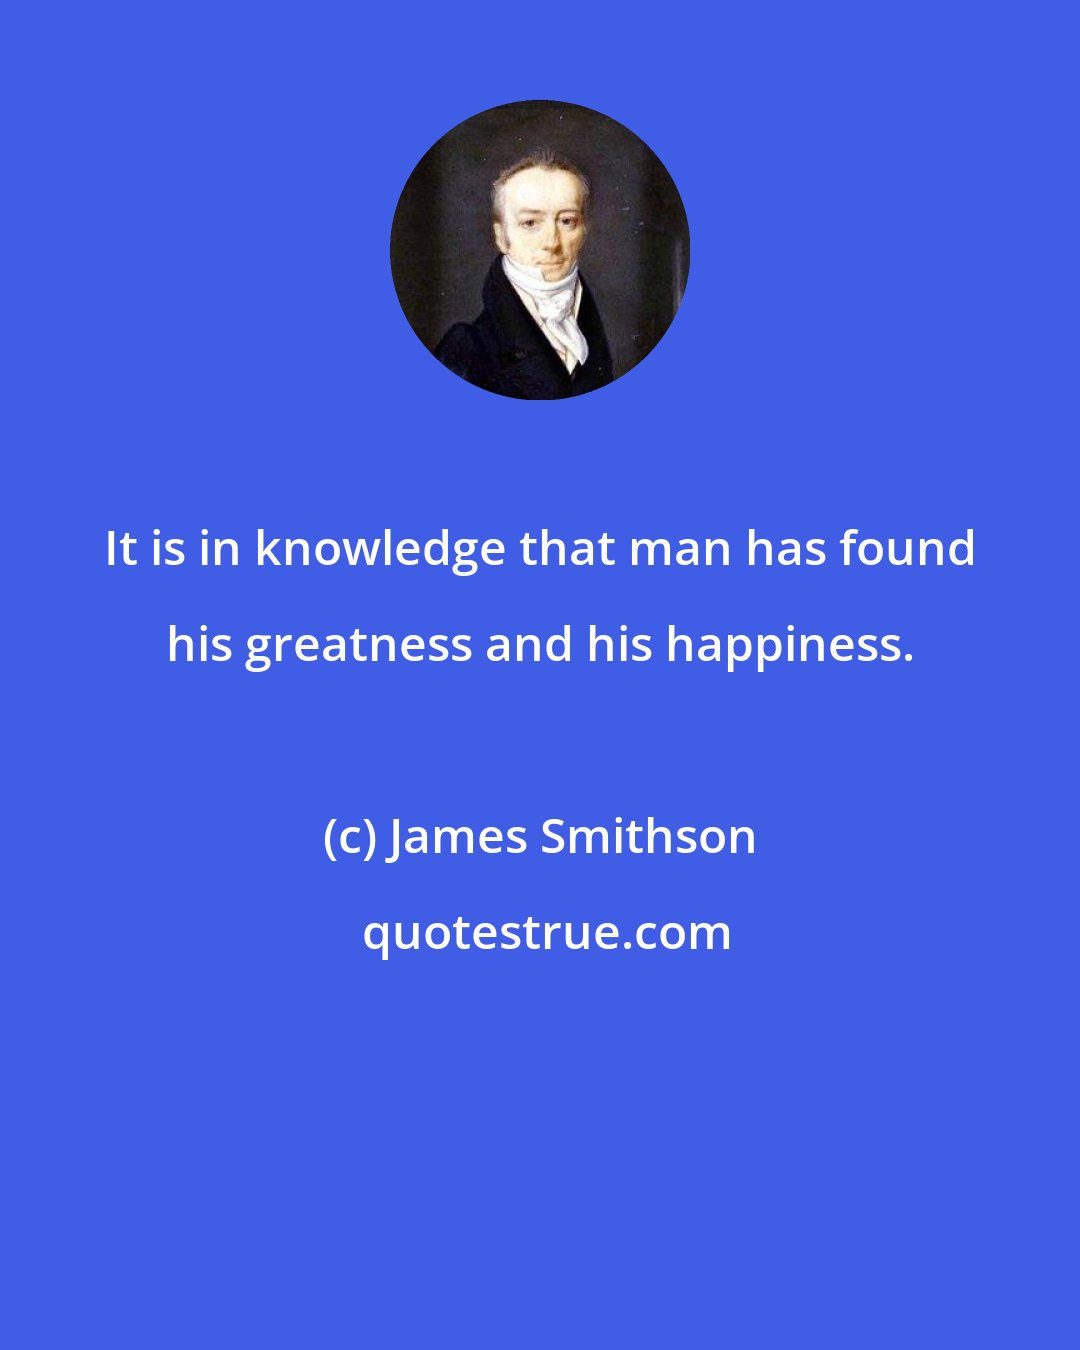 James Smithson: It is in knowledge that man has found his greatness and his happiness.